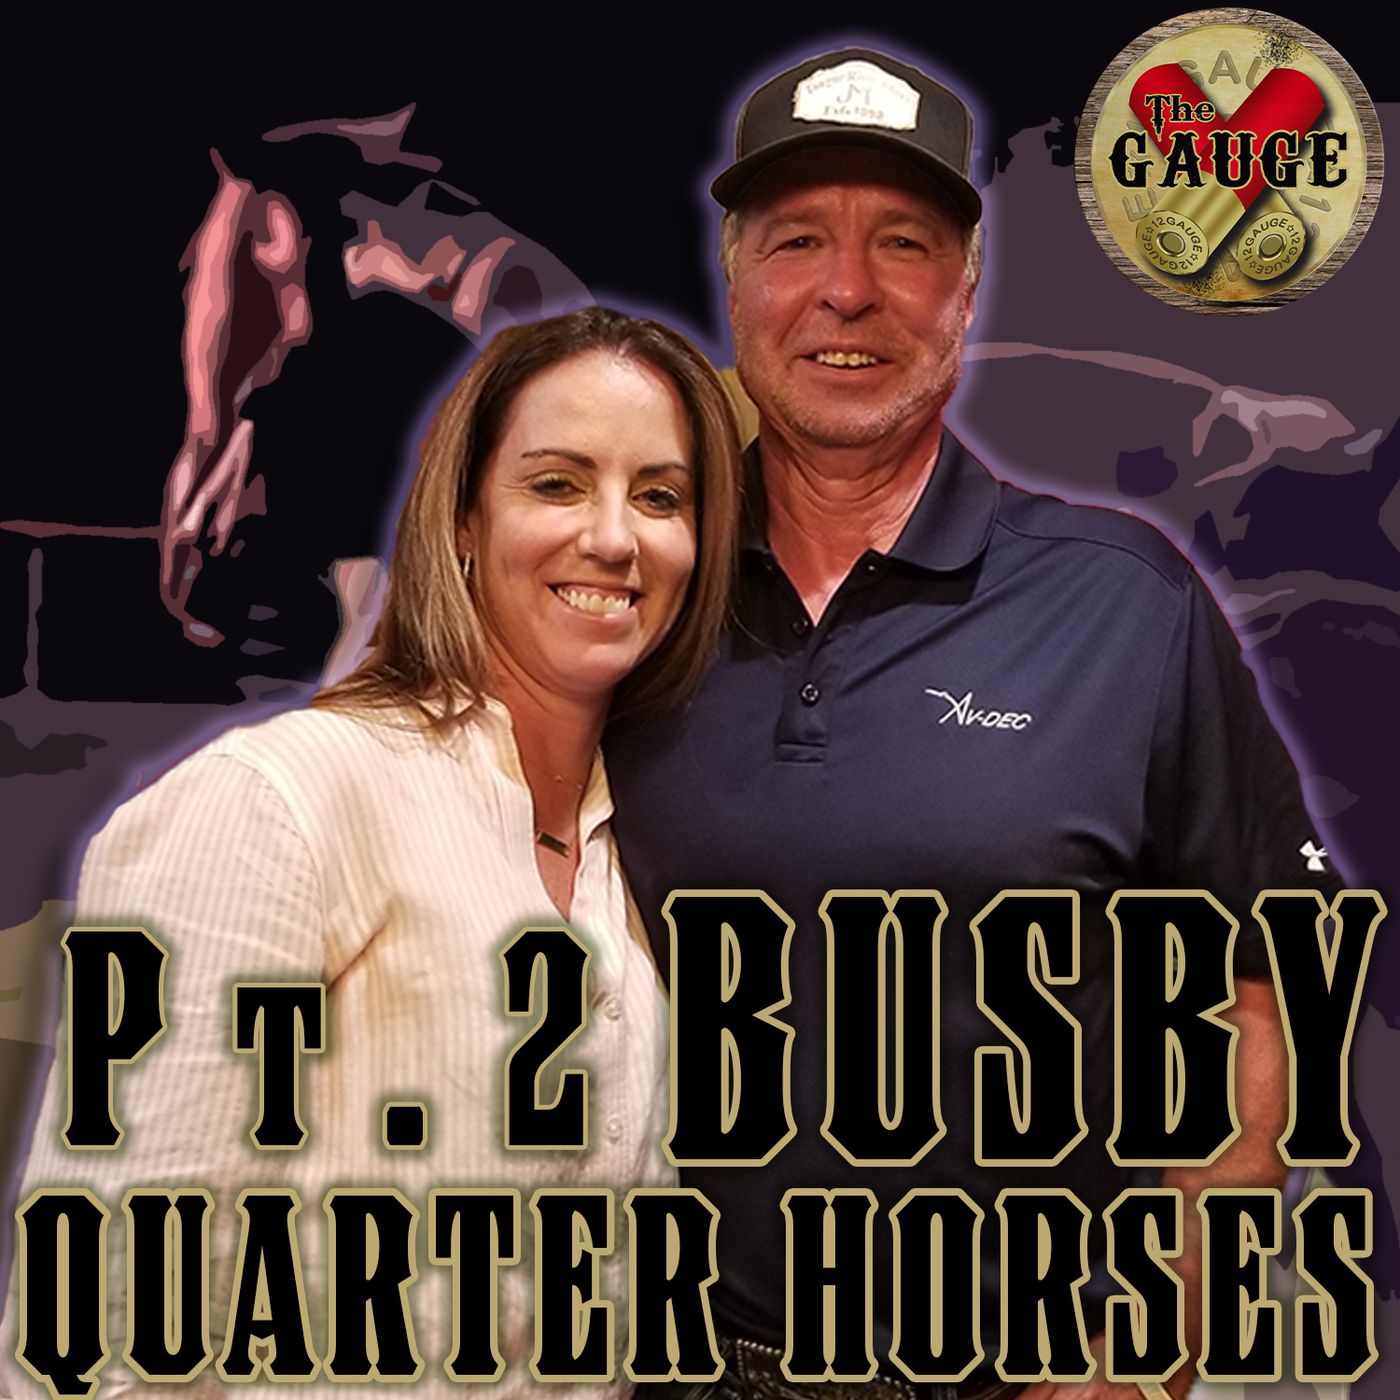 Busby Quarter Horses - Part Two